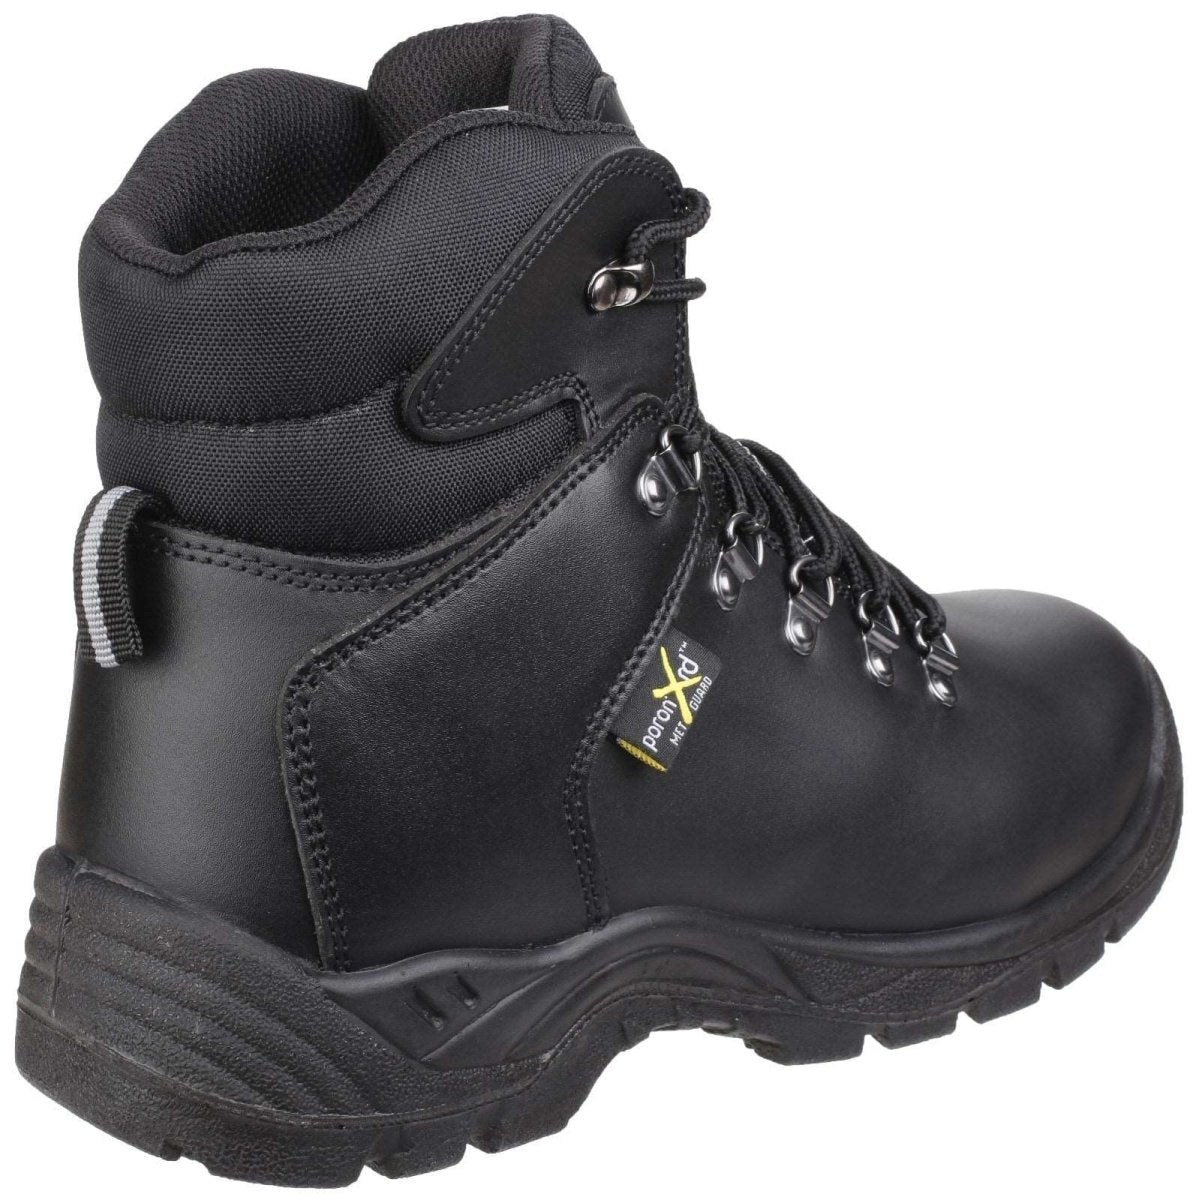 Amblers AS335 Poron XRD Internal Metatarsal Safety Boots - Shoe Store Direct